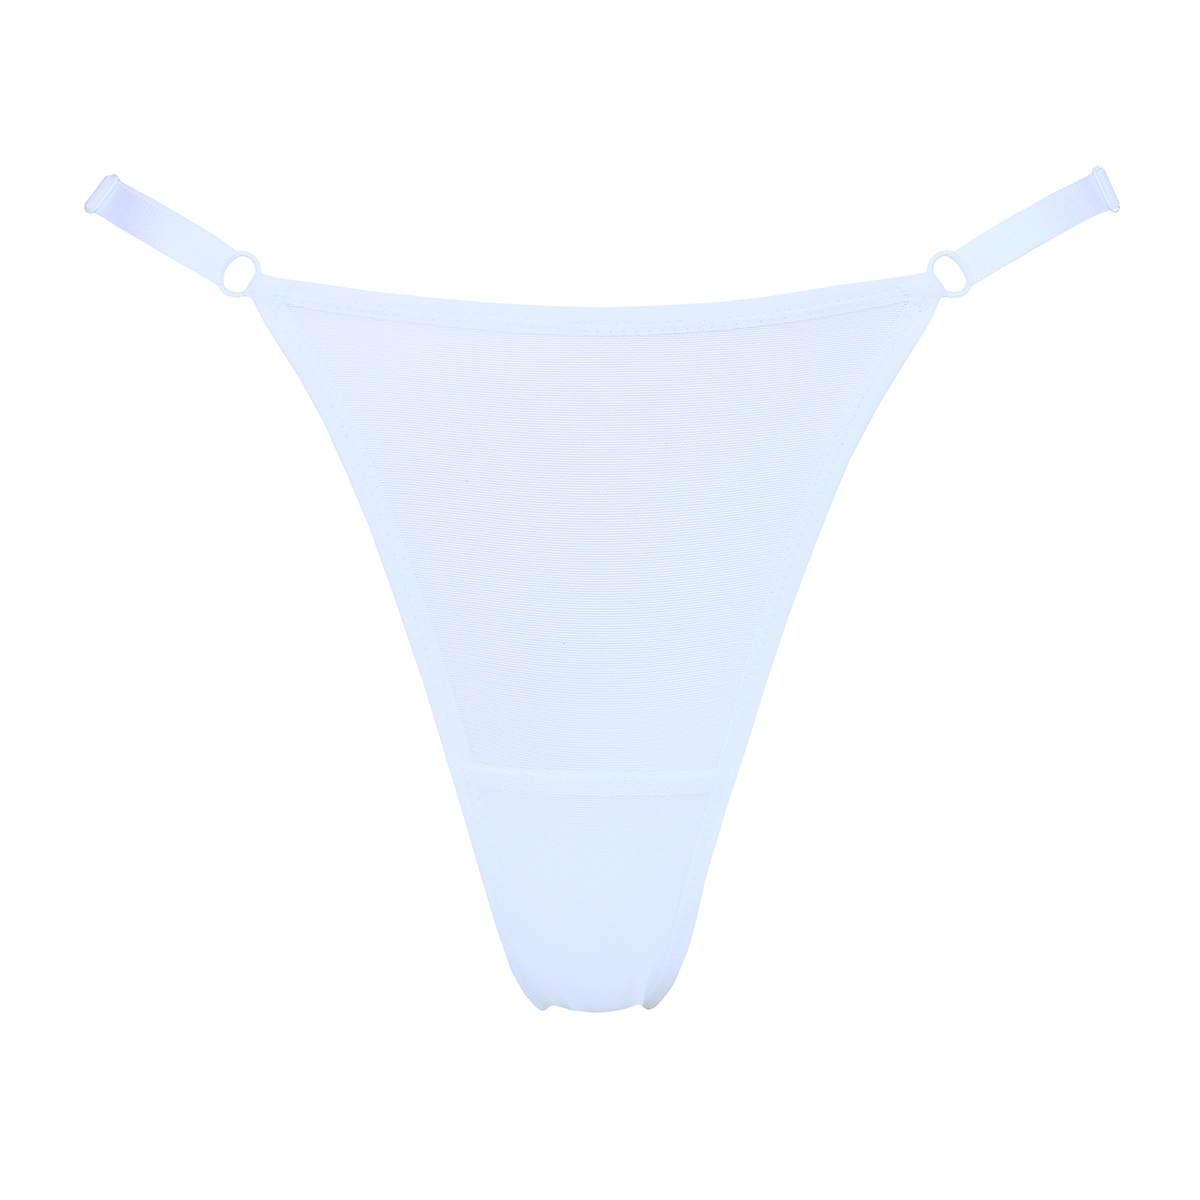 Oar Soak Cook a meal White Mesh Adjustable High Cut Thong by Flash you and me